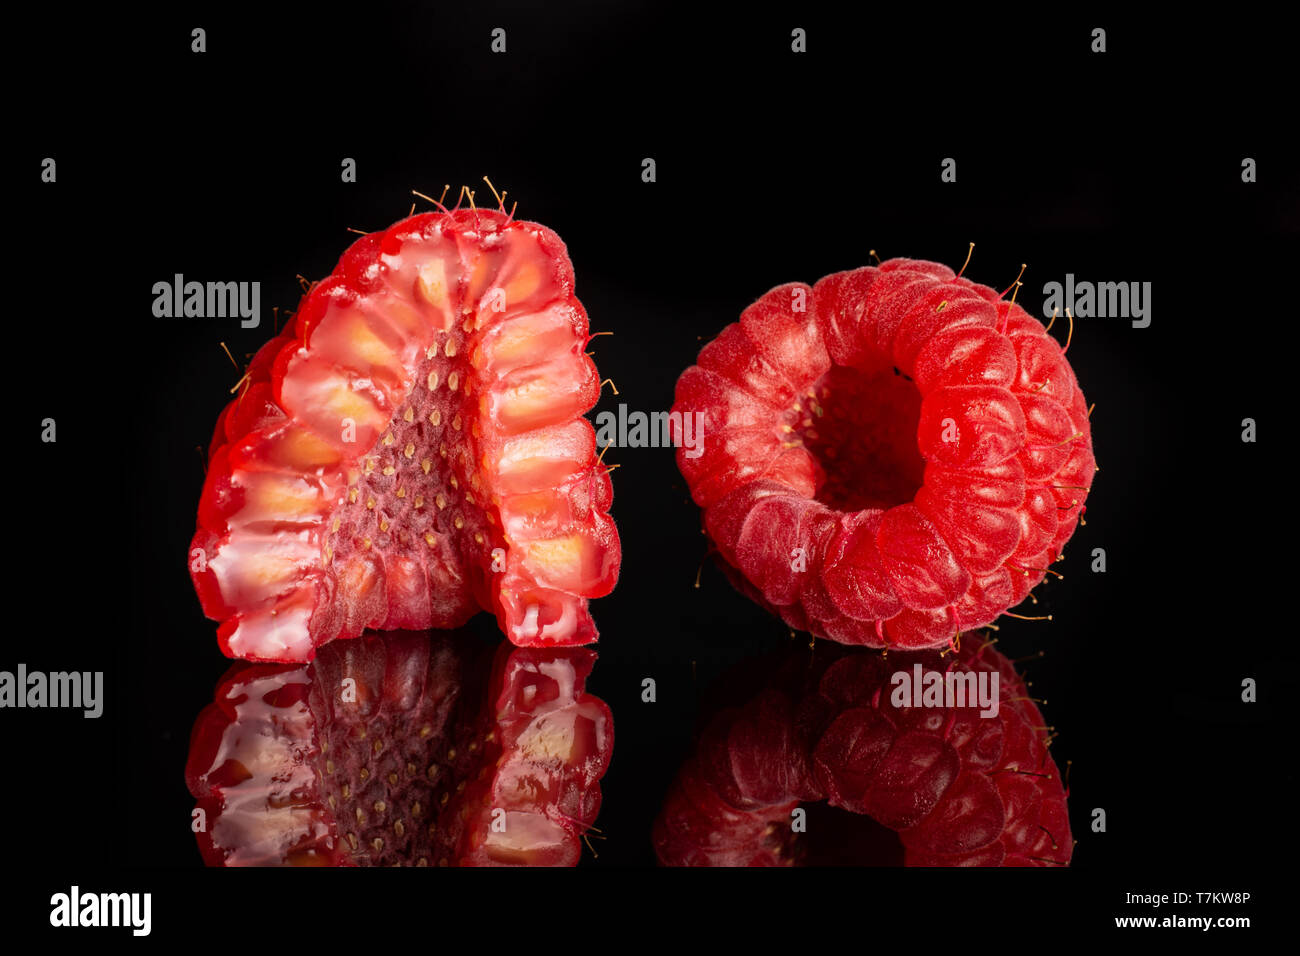 Group of one whole one half of fresh red raspberry cross section isolated on black glass Stock Photo